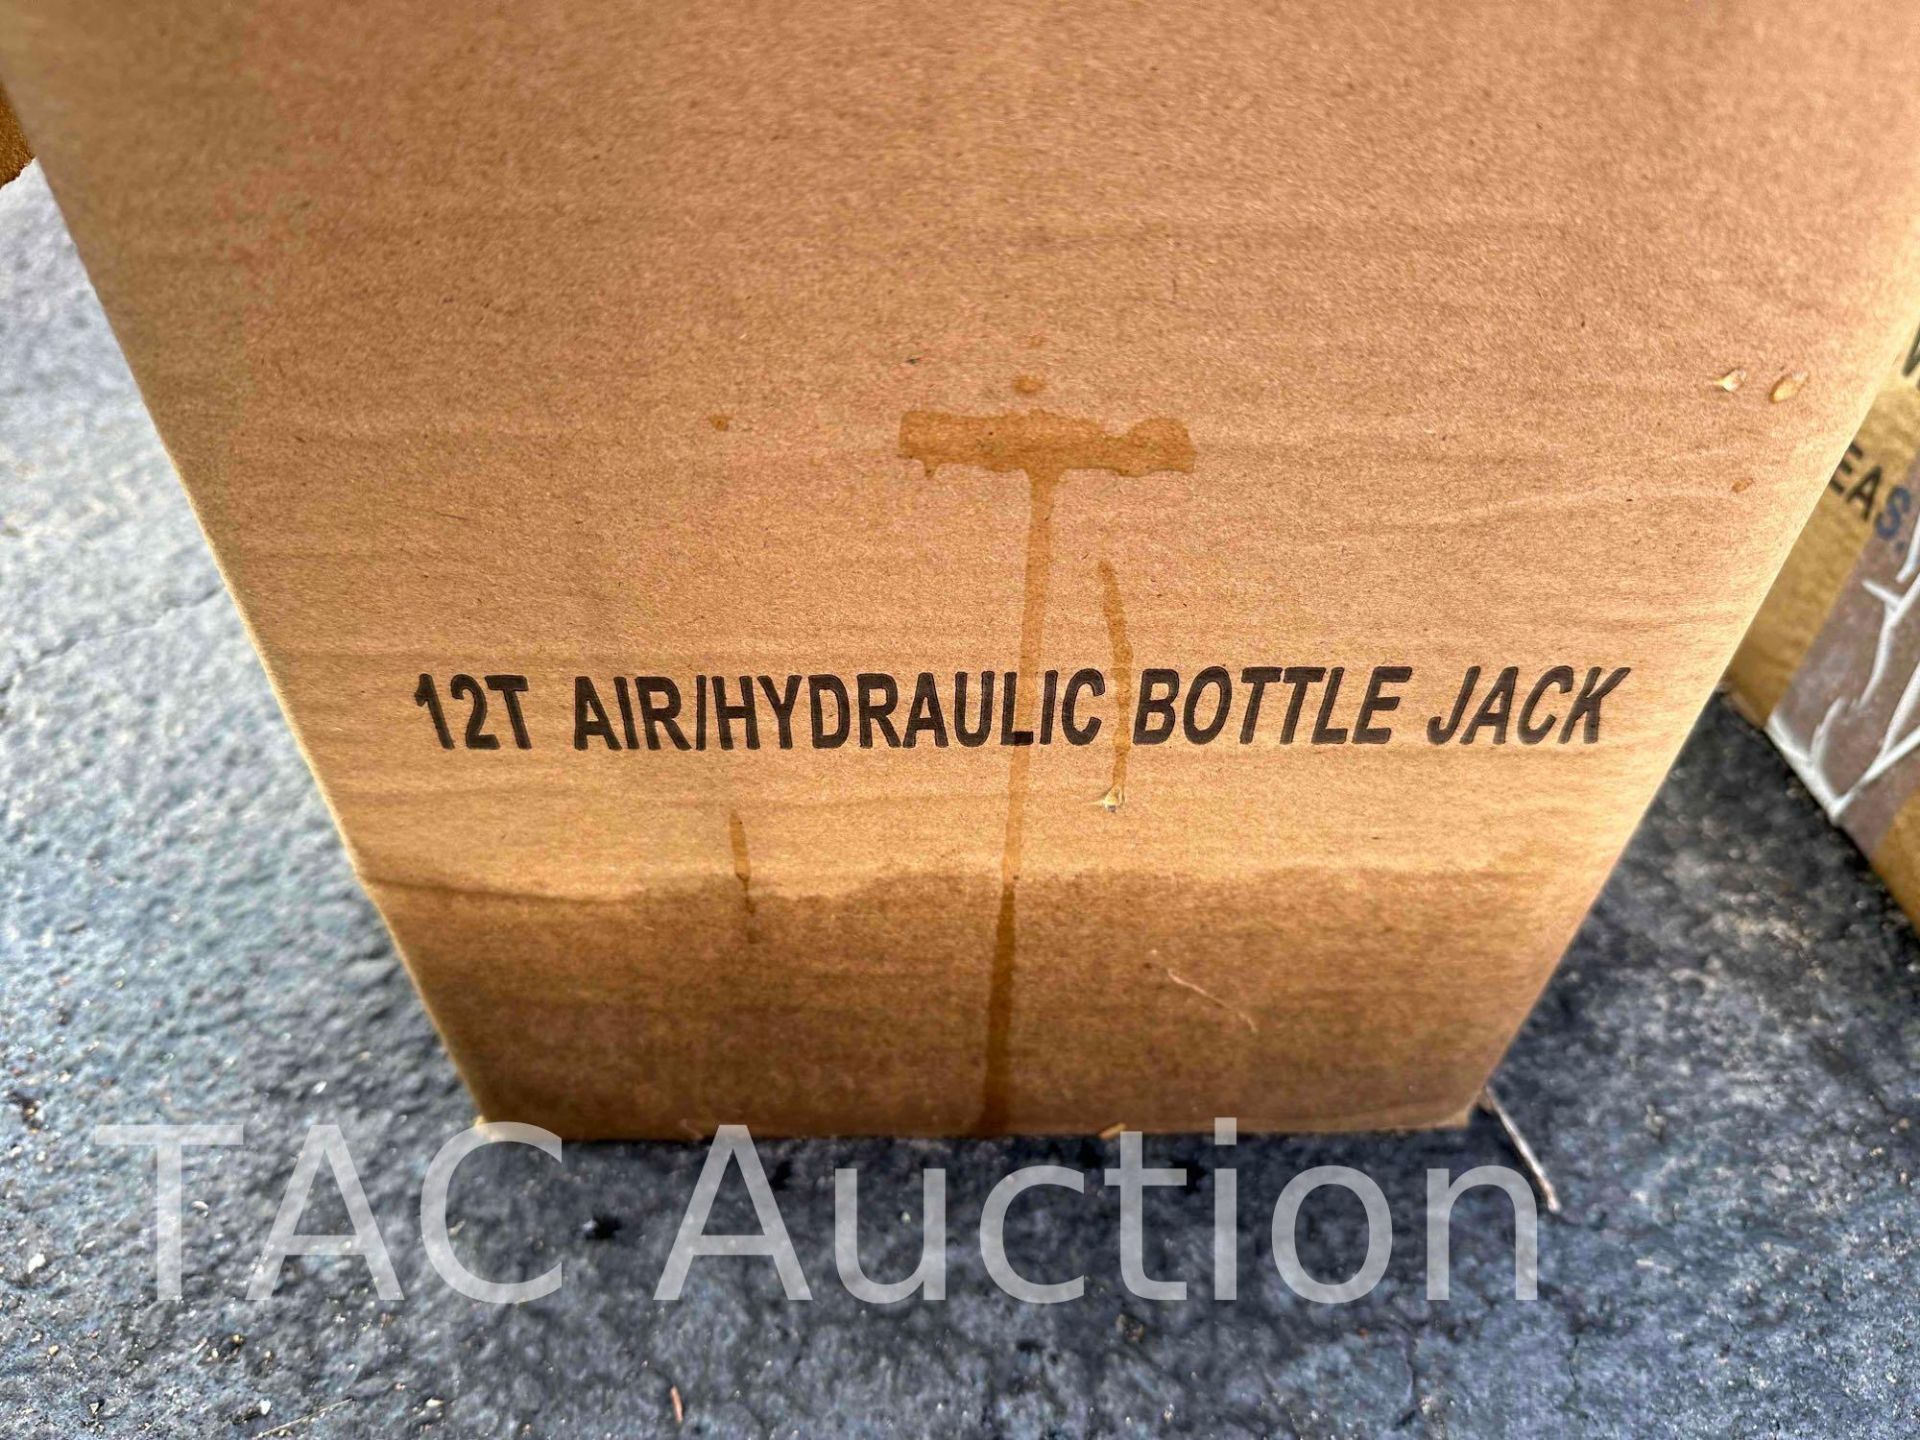 New Air/Hydraulic Bottle Jack - Image 3 of 3